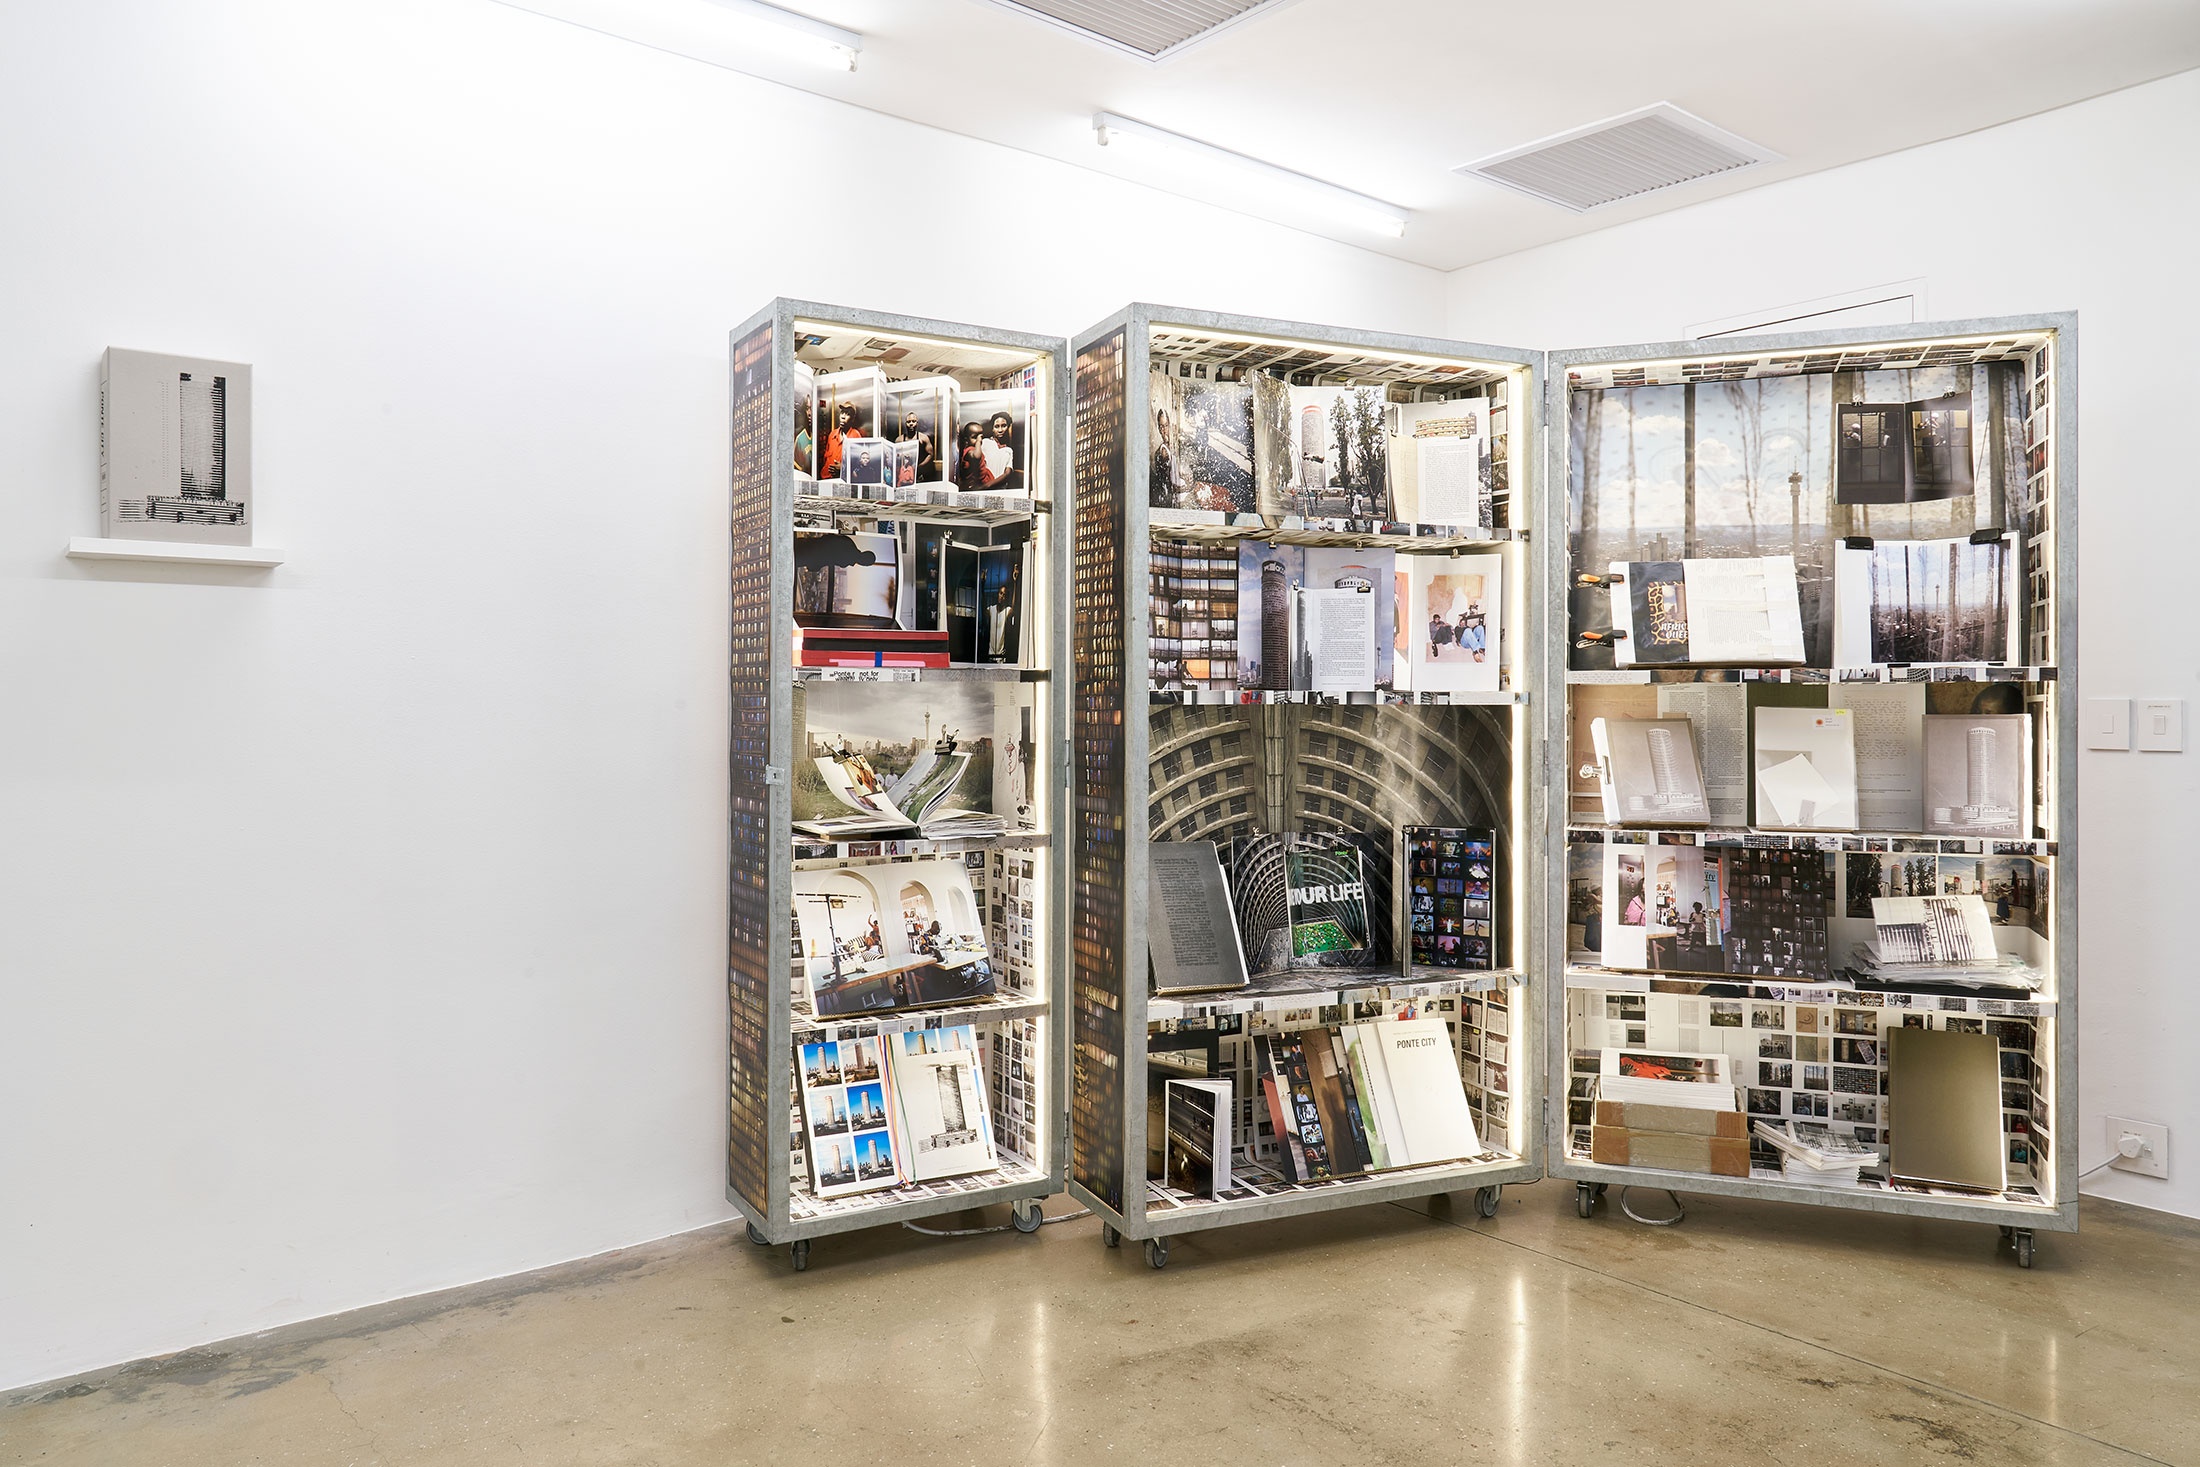 Installation photograph from the Photo Book! Photo-Book! Photobook! exhibition in A4’s Gallery. On the right, Mikhael Subotzky and Patrick Waterhouse’s cabinet installation of the 'Ponte City' archive. On the left, Mikhael Subotzky and Patrick Waterhouse’s book ‘Ponte City’ sits on a wall-mounted shelf.
